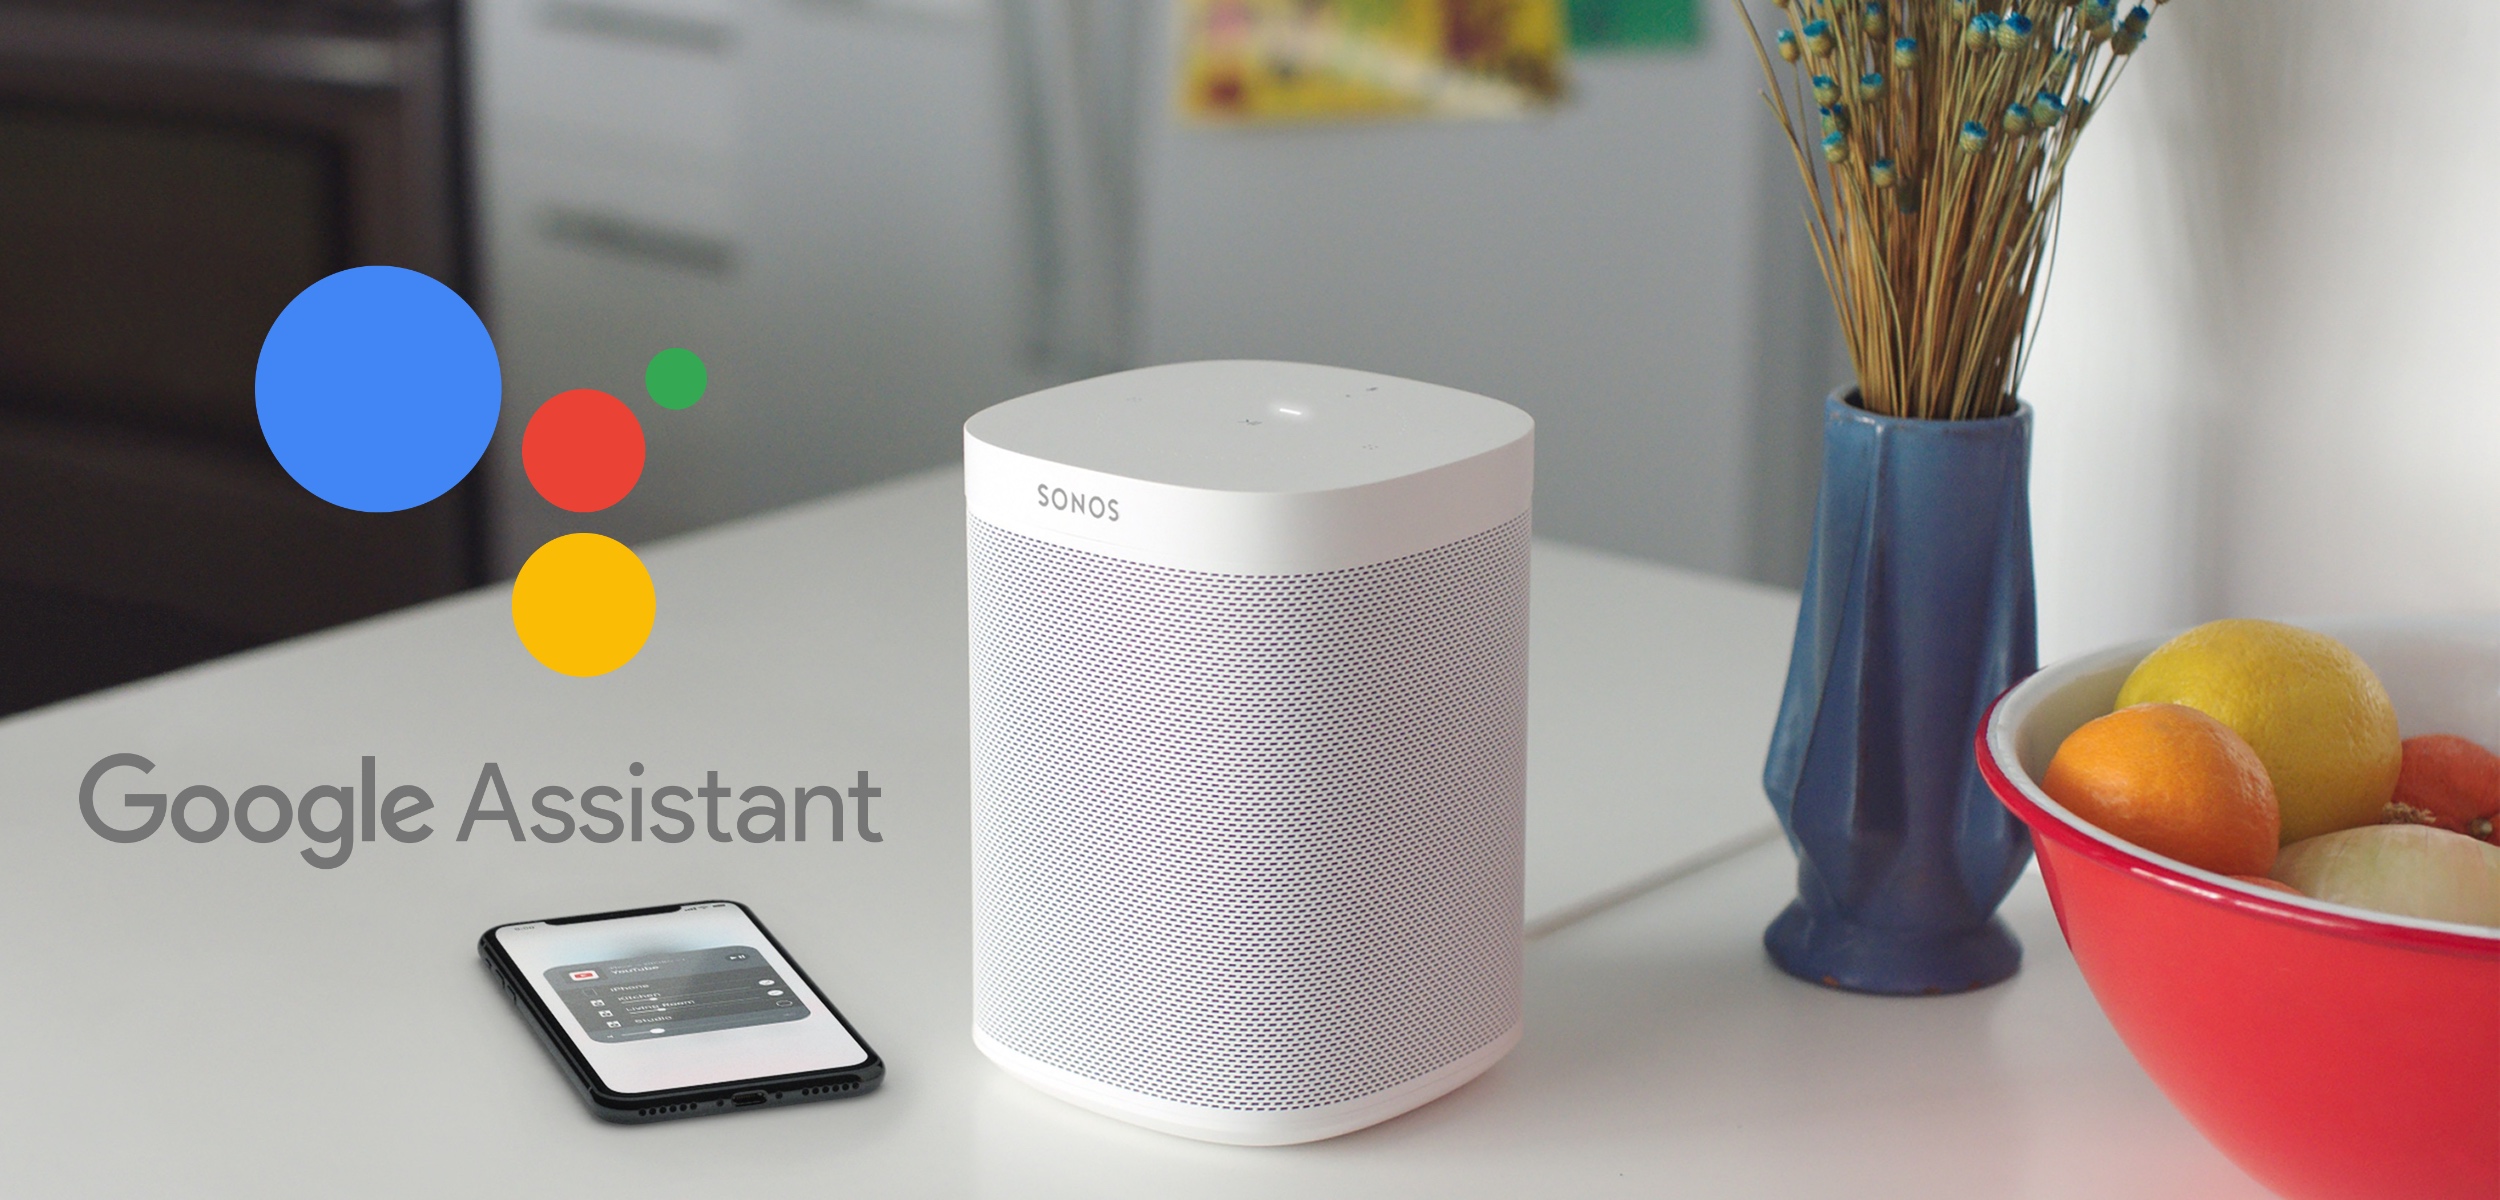 Google Assistant has landed on Sonos the | Home Sounds